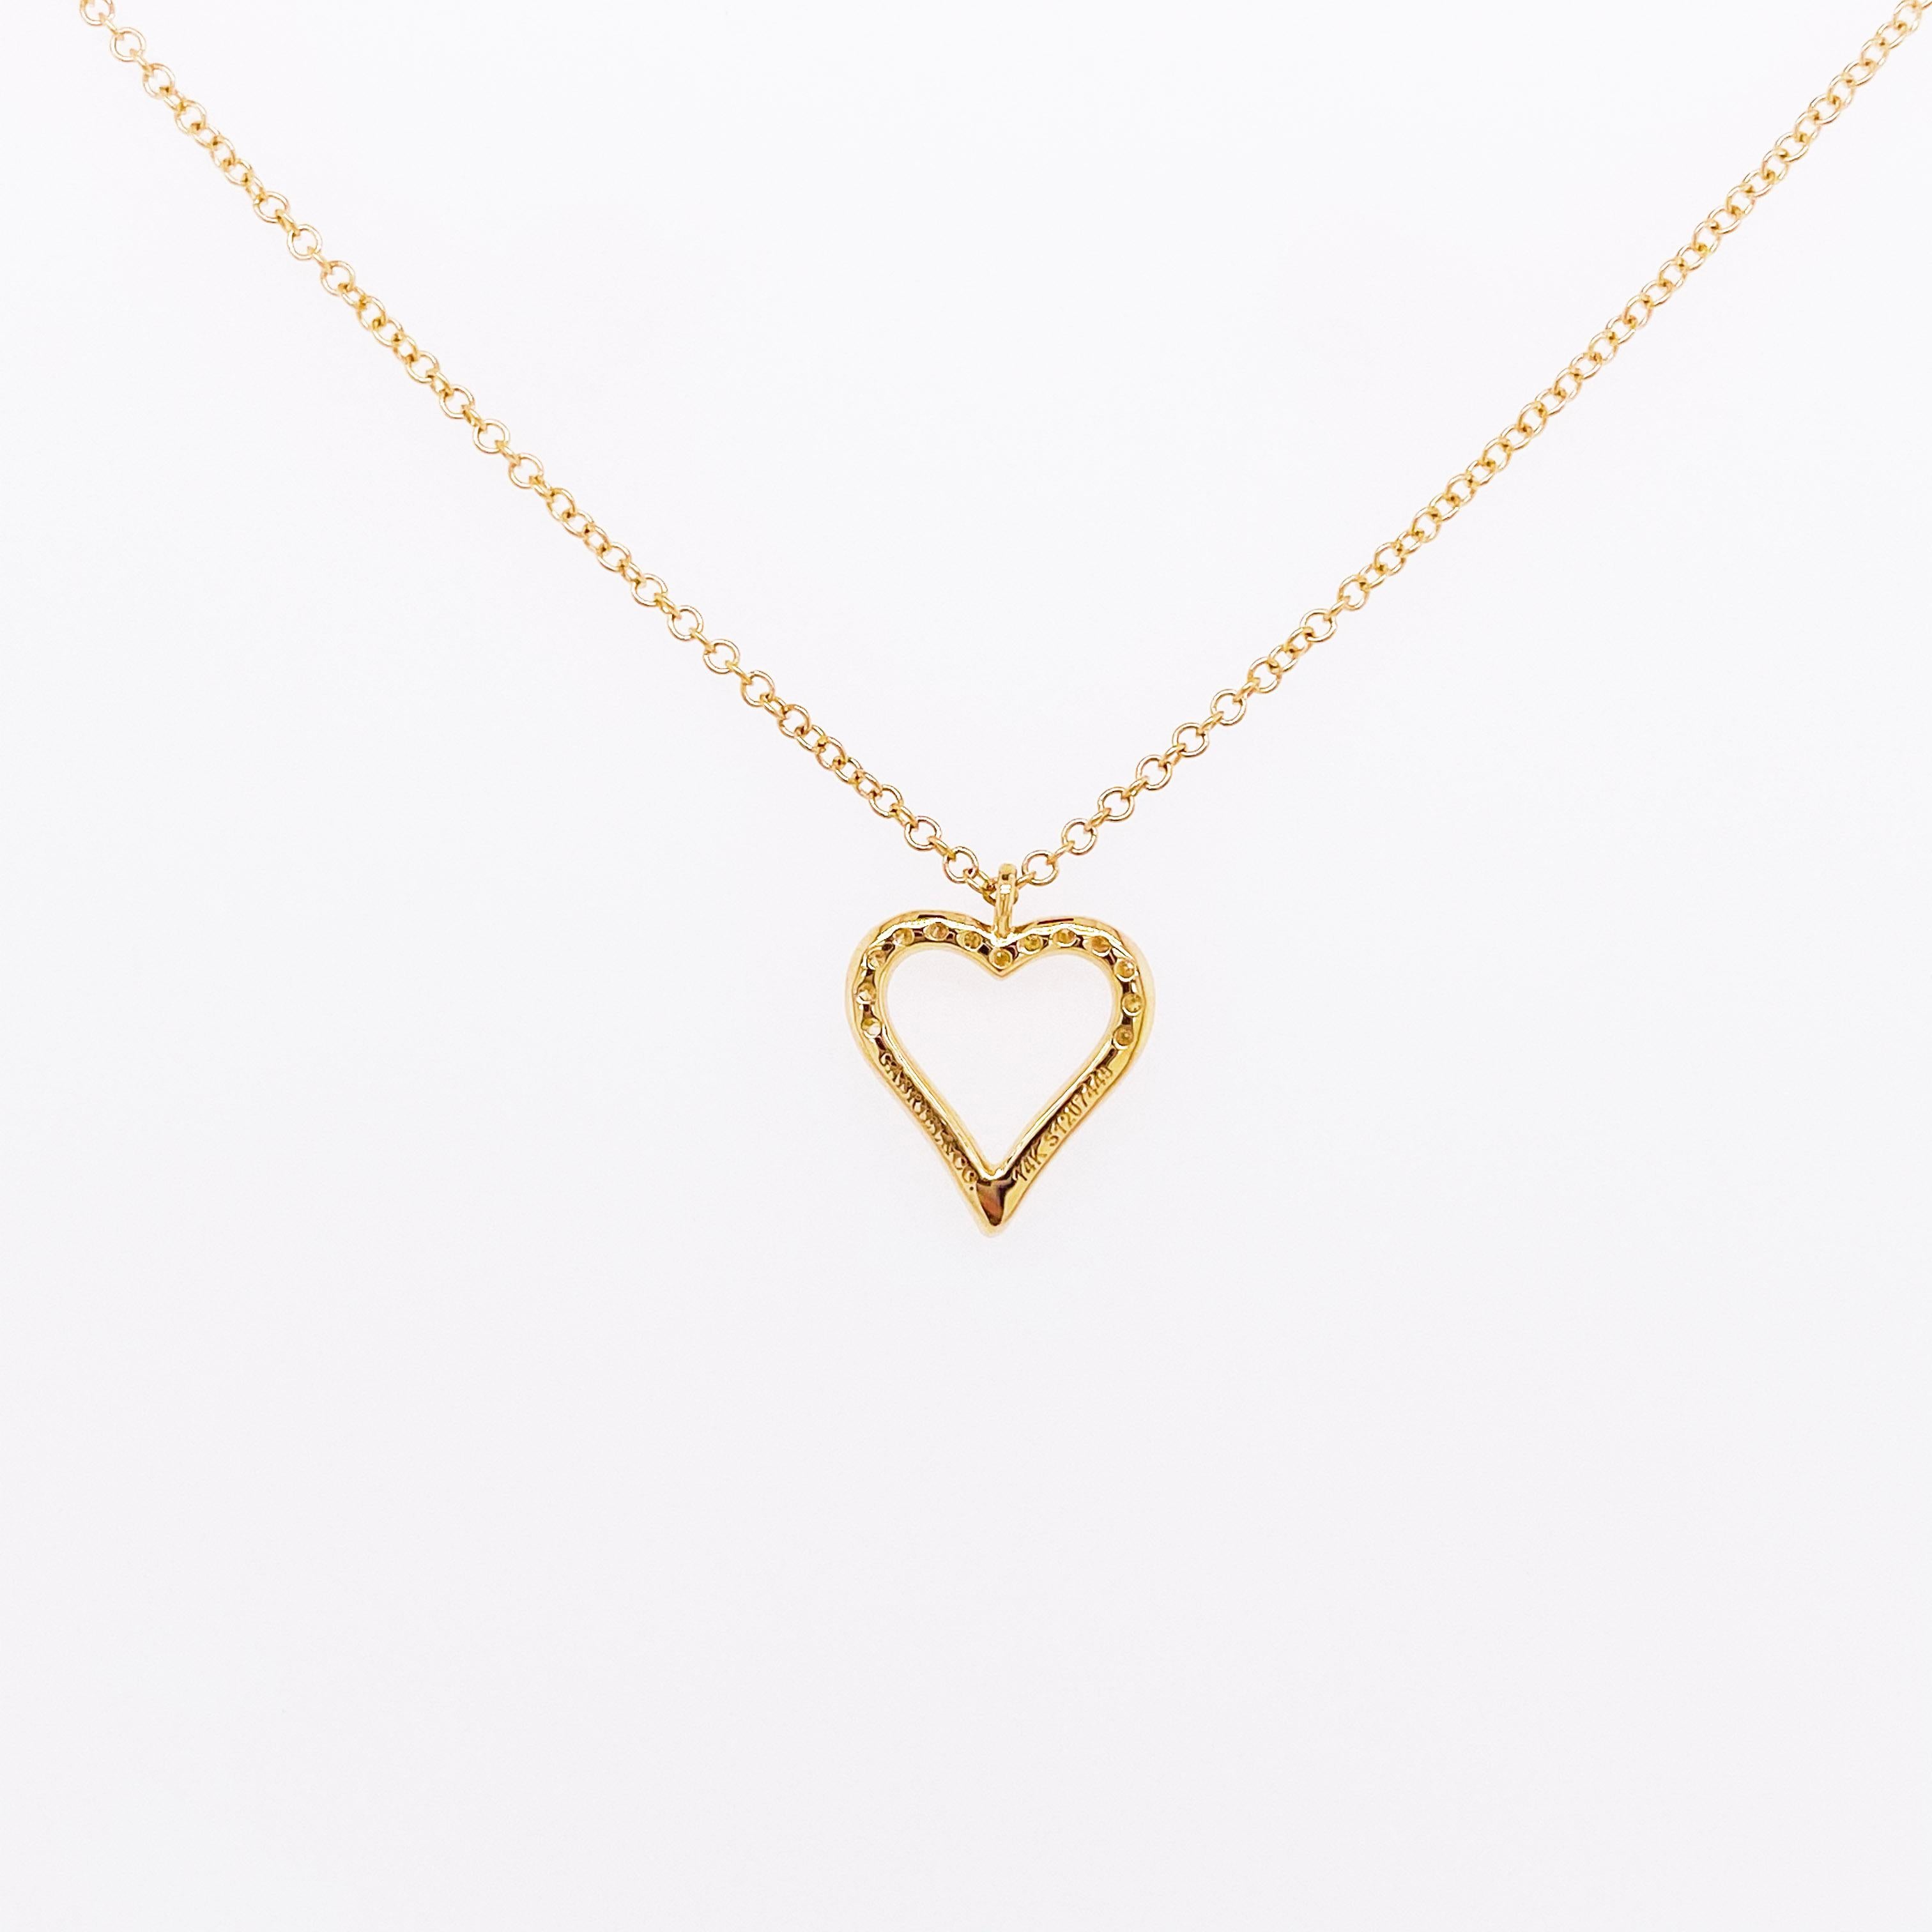 Round Cut Diamond Heart Necklace, 14K Yellow Gold Pave Diamond Open Heart, NK5452Y45JJ For Sale